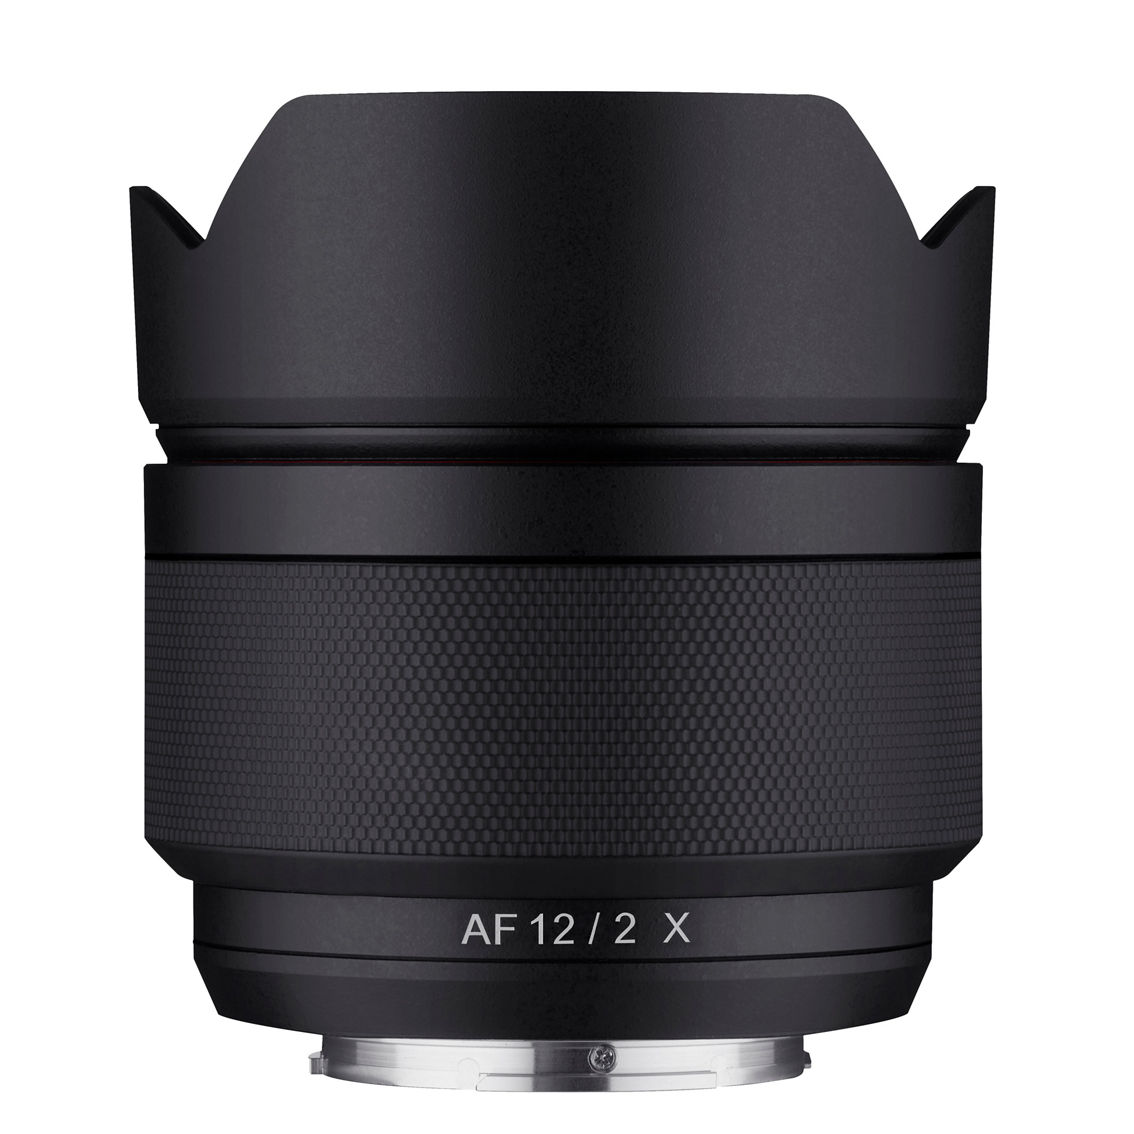 Rokinon 12mm f/2.0 AF APS-C Compact Ultra Wide Angle Lens for Fujifilm X